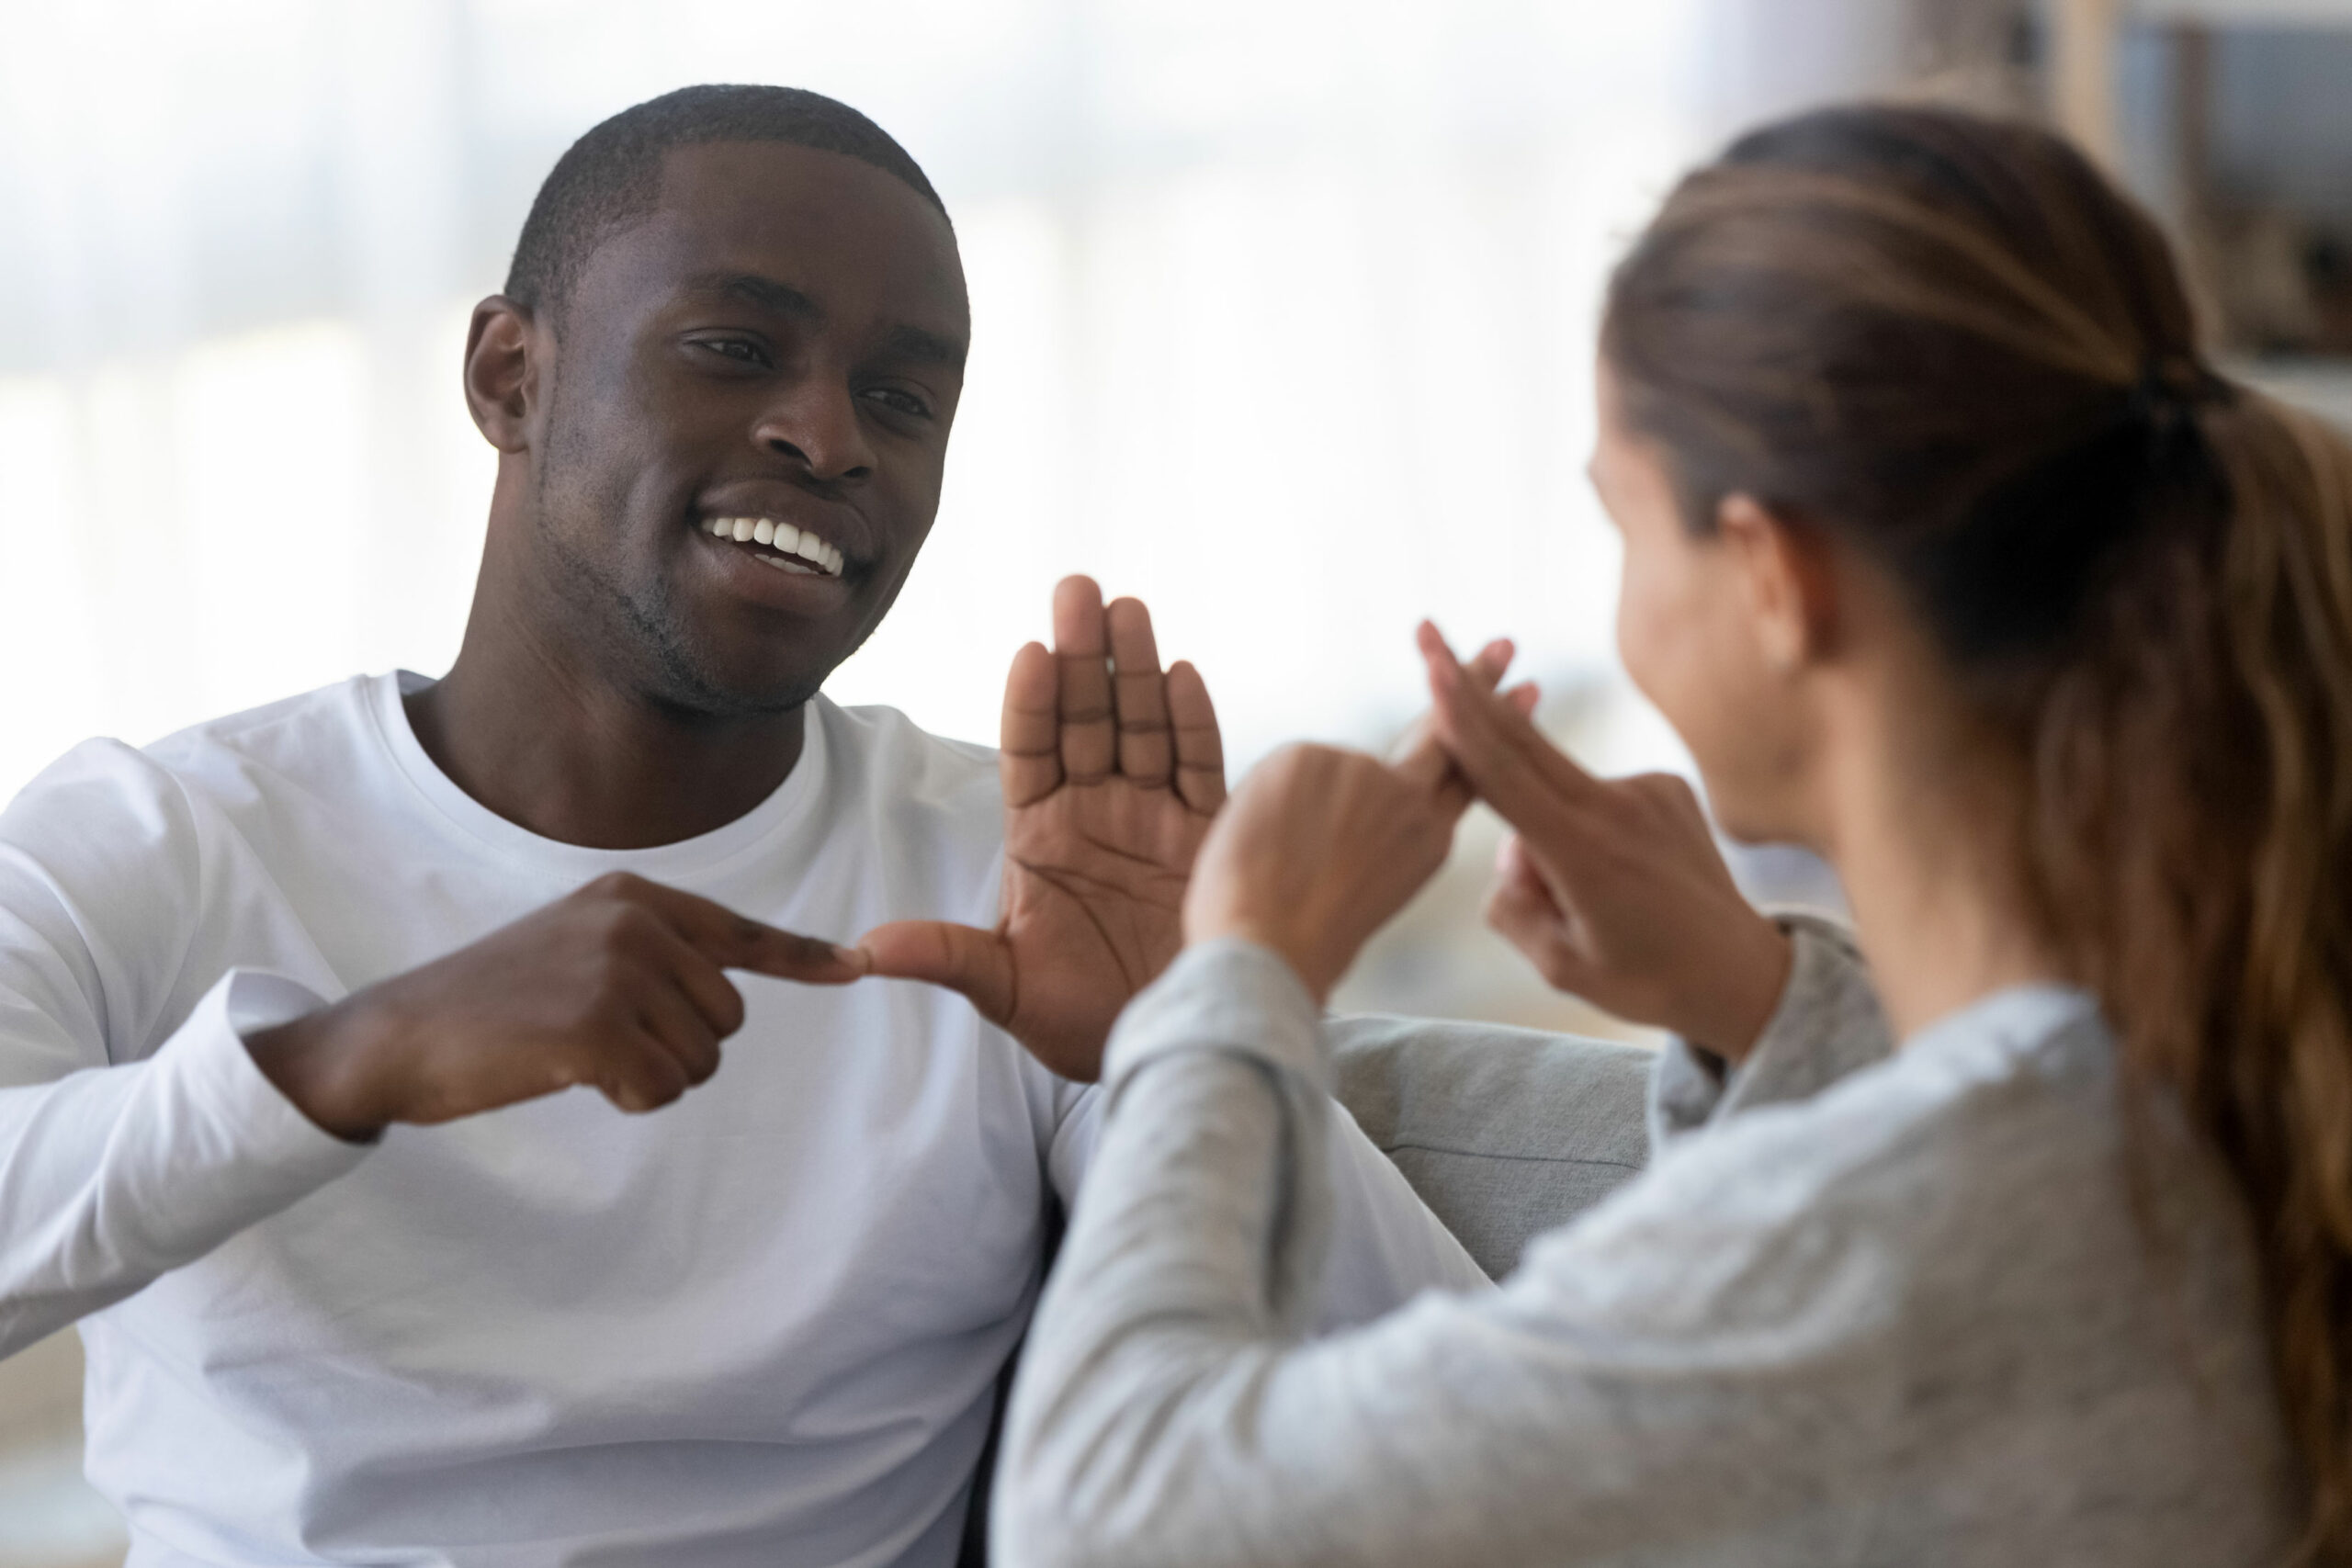 Two people smiling and conversing using sign language